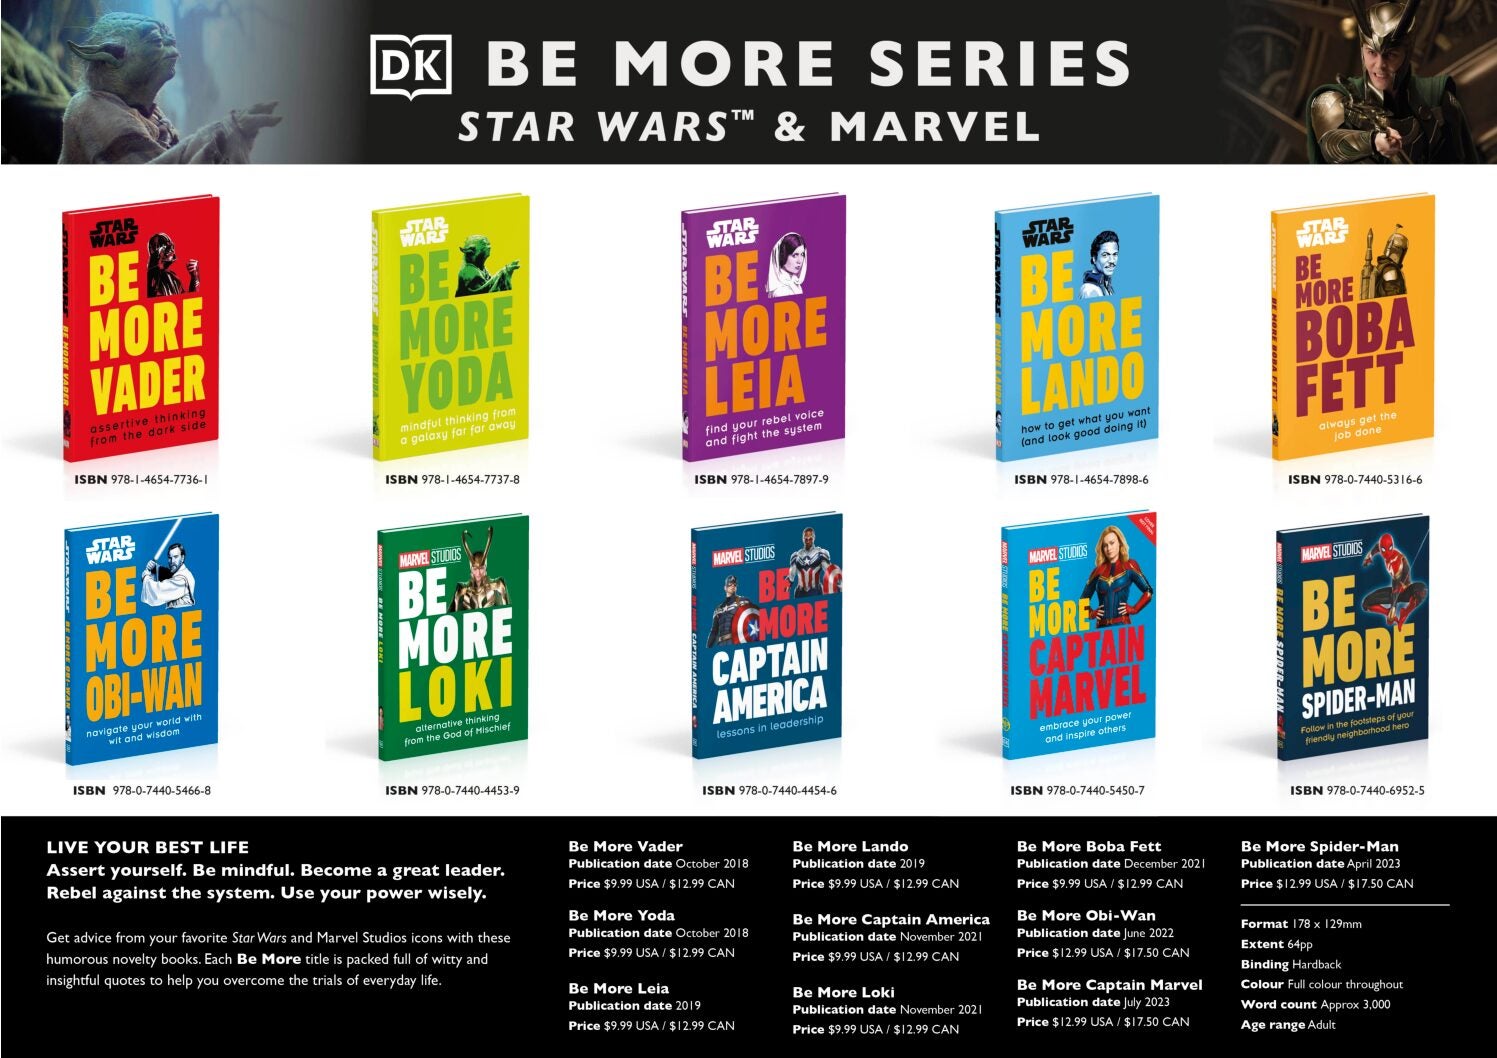 DK Be More Series – Star Wars & Marvel cover